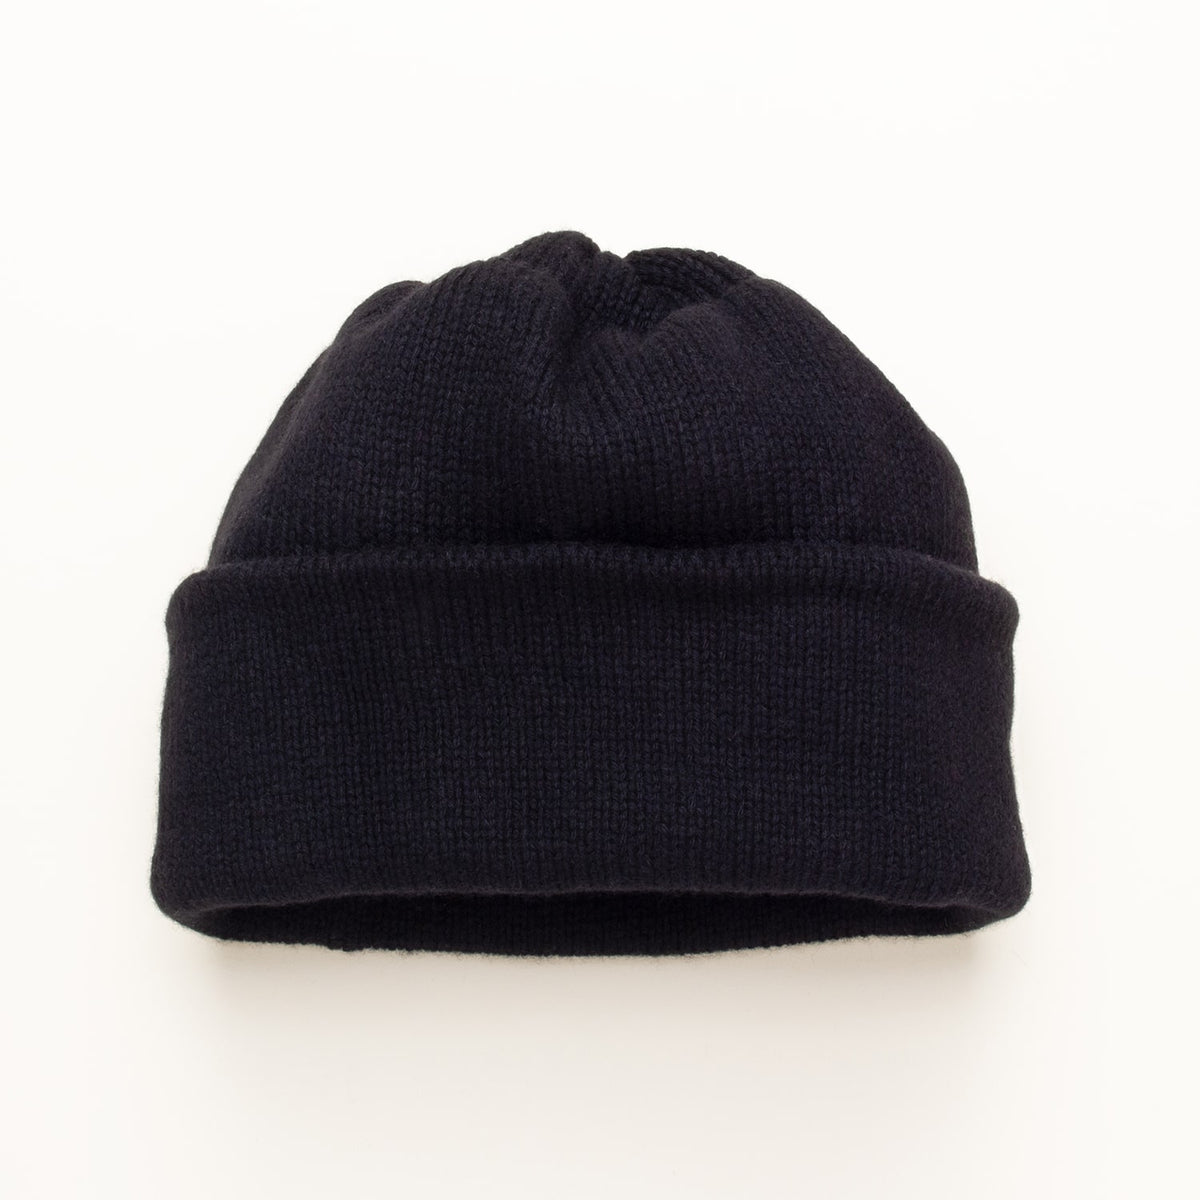 The Watchcap – Golightly Cashmere